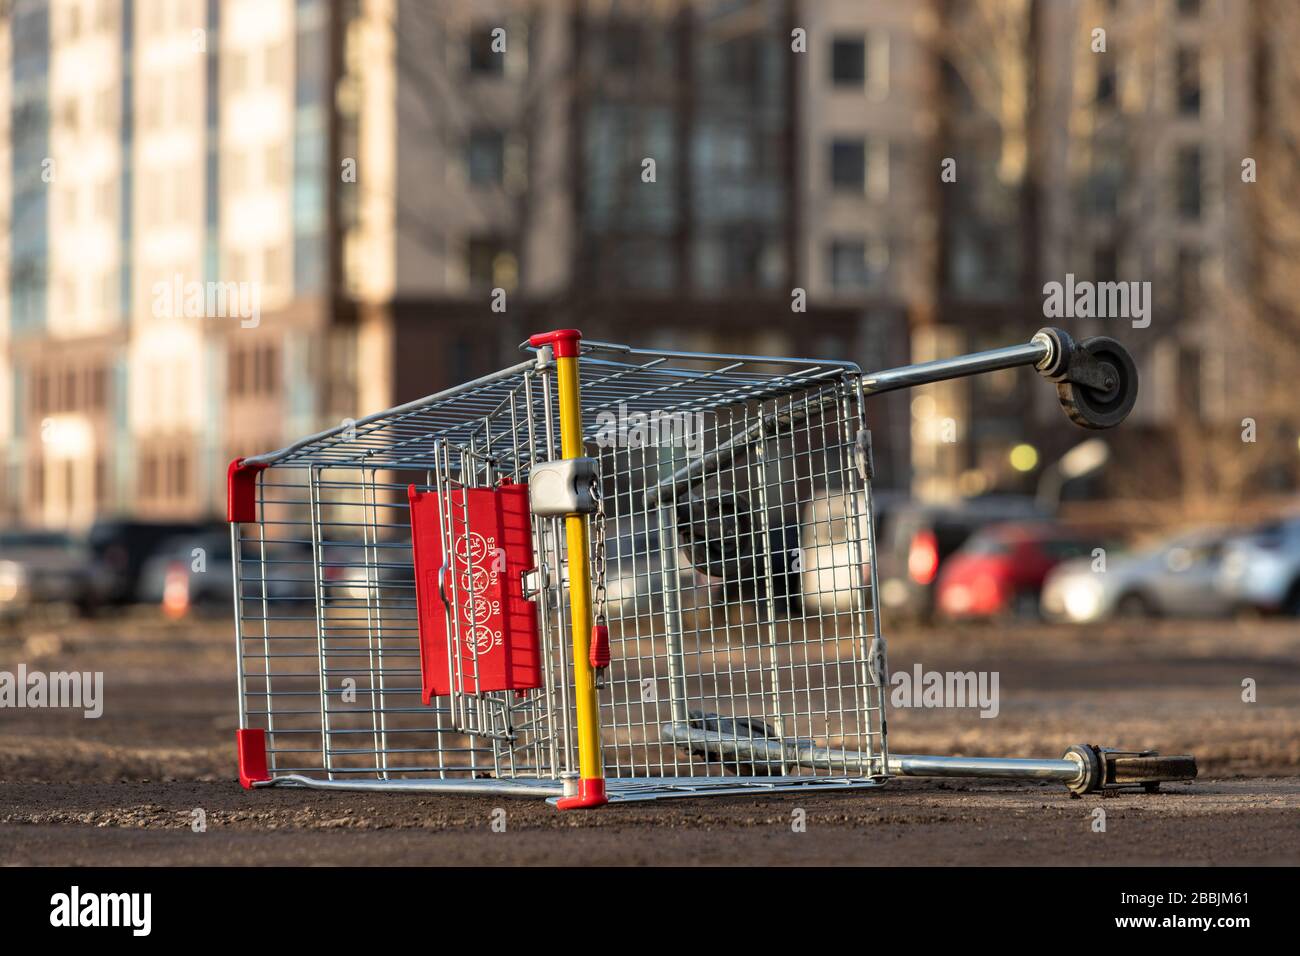 Inverted empty shopping cart on the street. Coronavirus pandemic effect - quarantine and isolation of the population in cities. Crisis, panic buying f Stock Photo